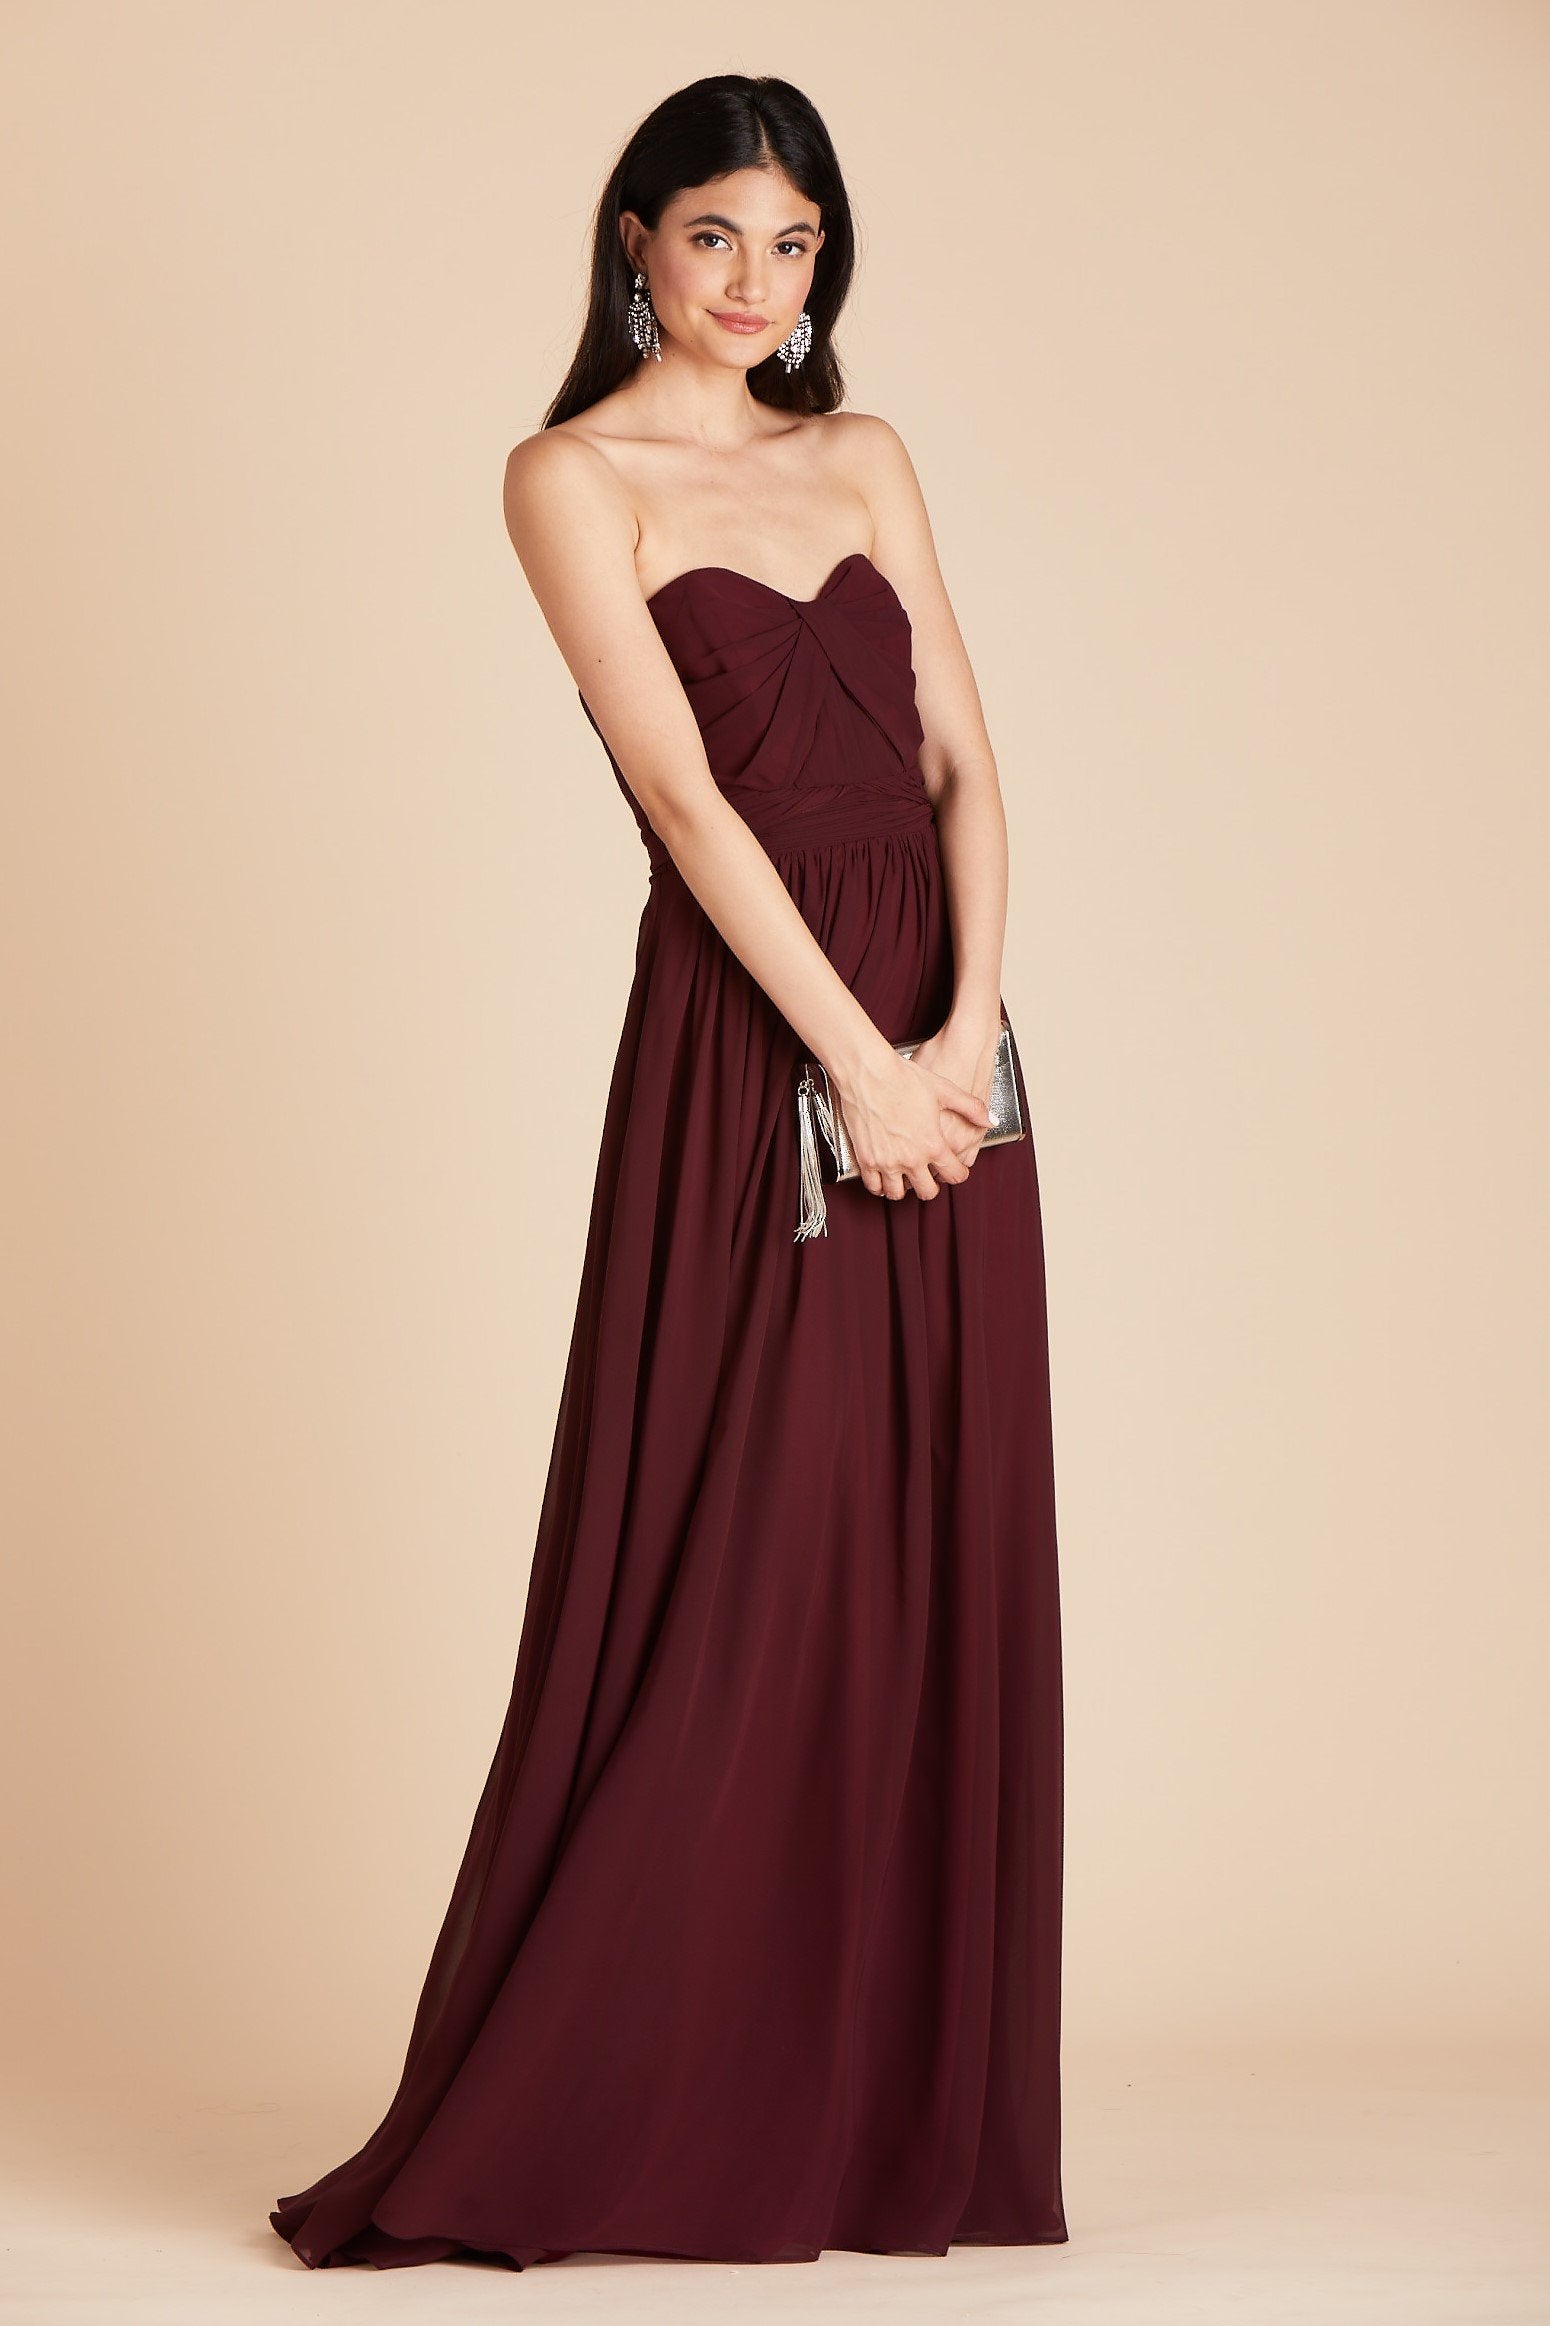 Grace convertible bridesmaid dress in cabernet burgundy chiffon by Birdy Grey, side view